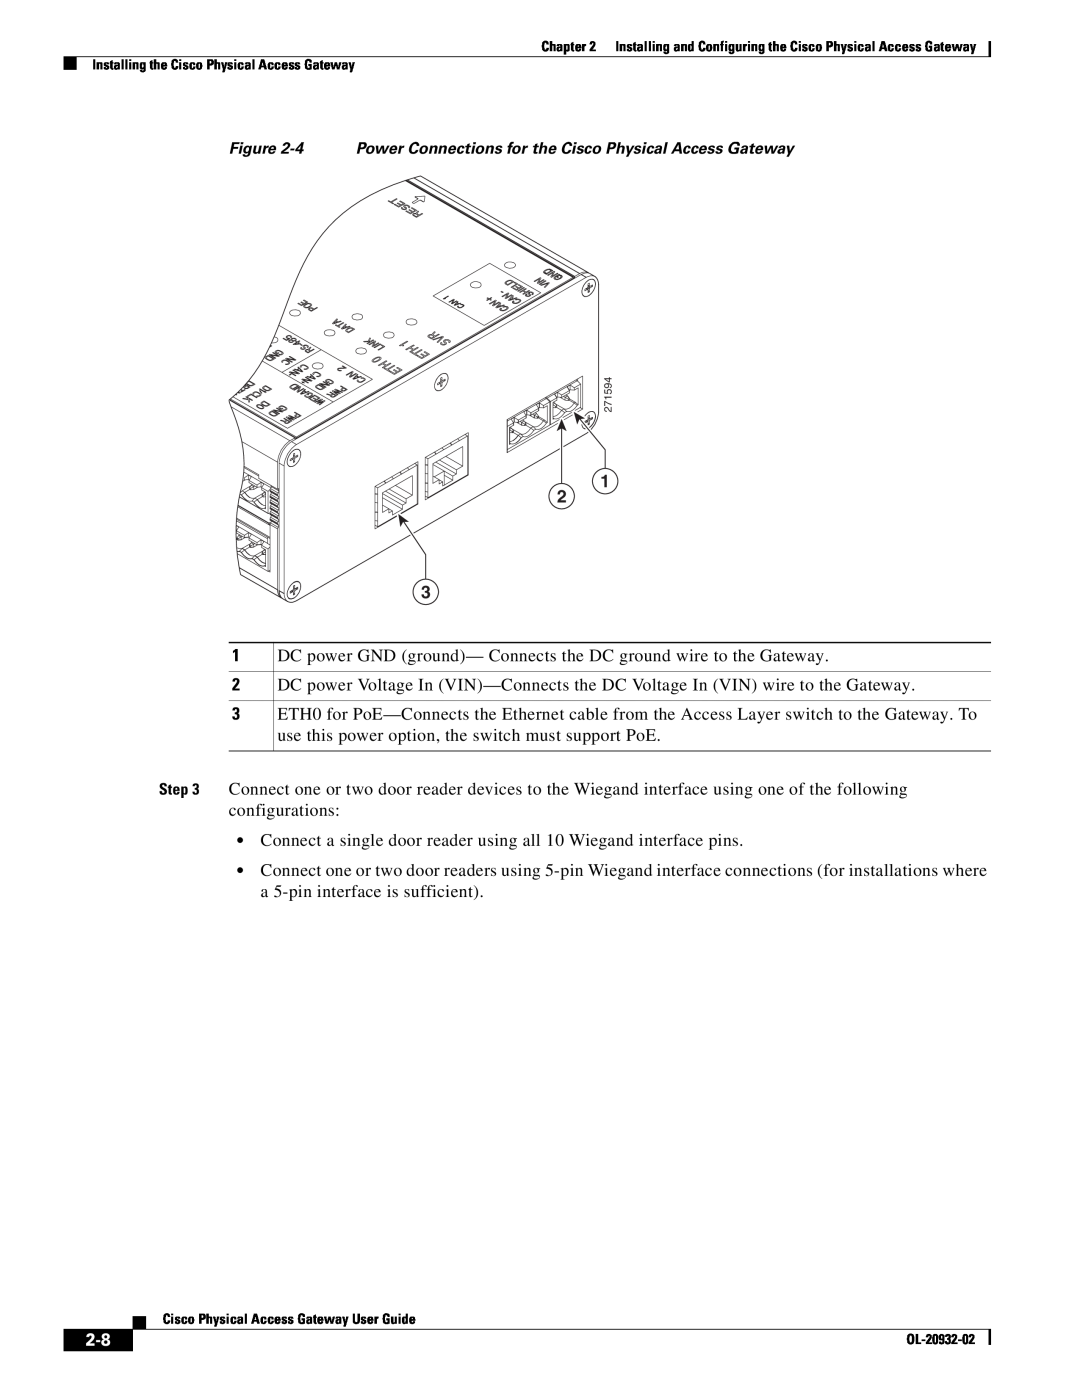 Cisco Systems OL-20932-02 manual DC power GND ground- Connects the DC ground wire to the Gateway 